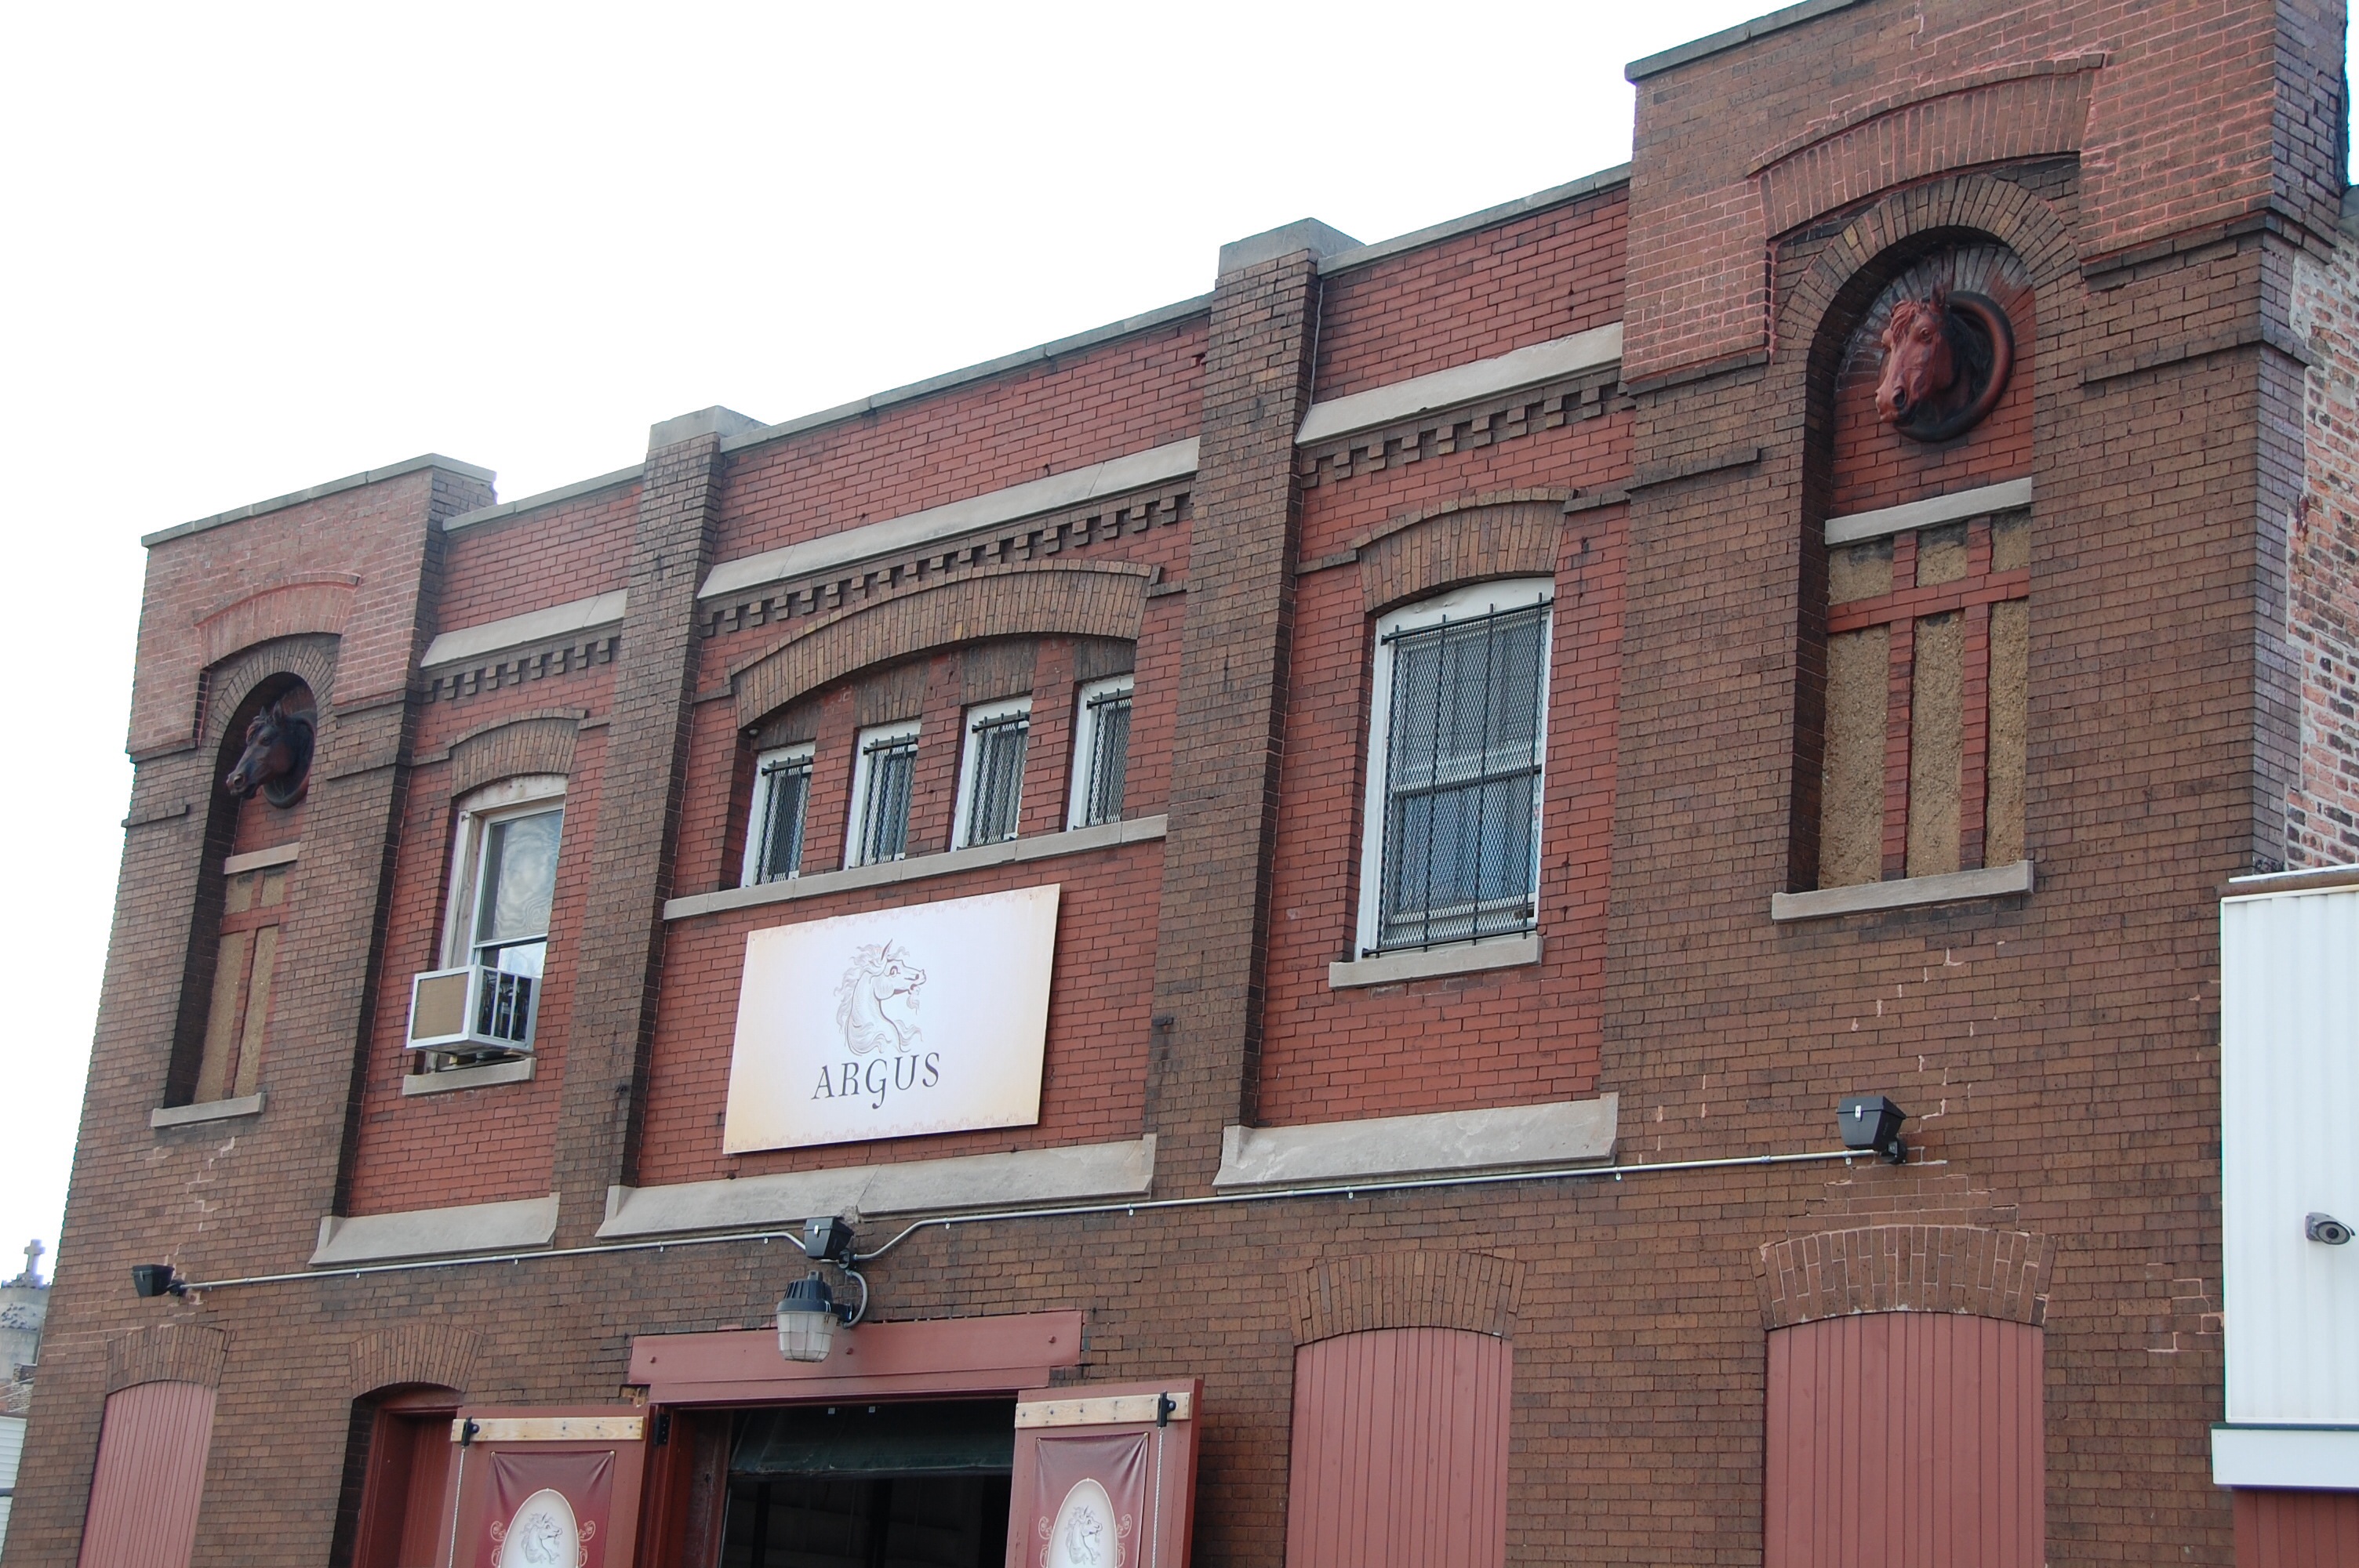 The historic building is now home to Argus Brewery 